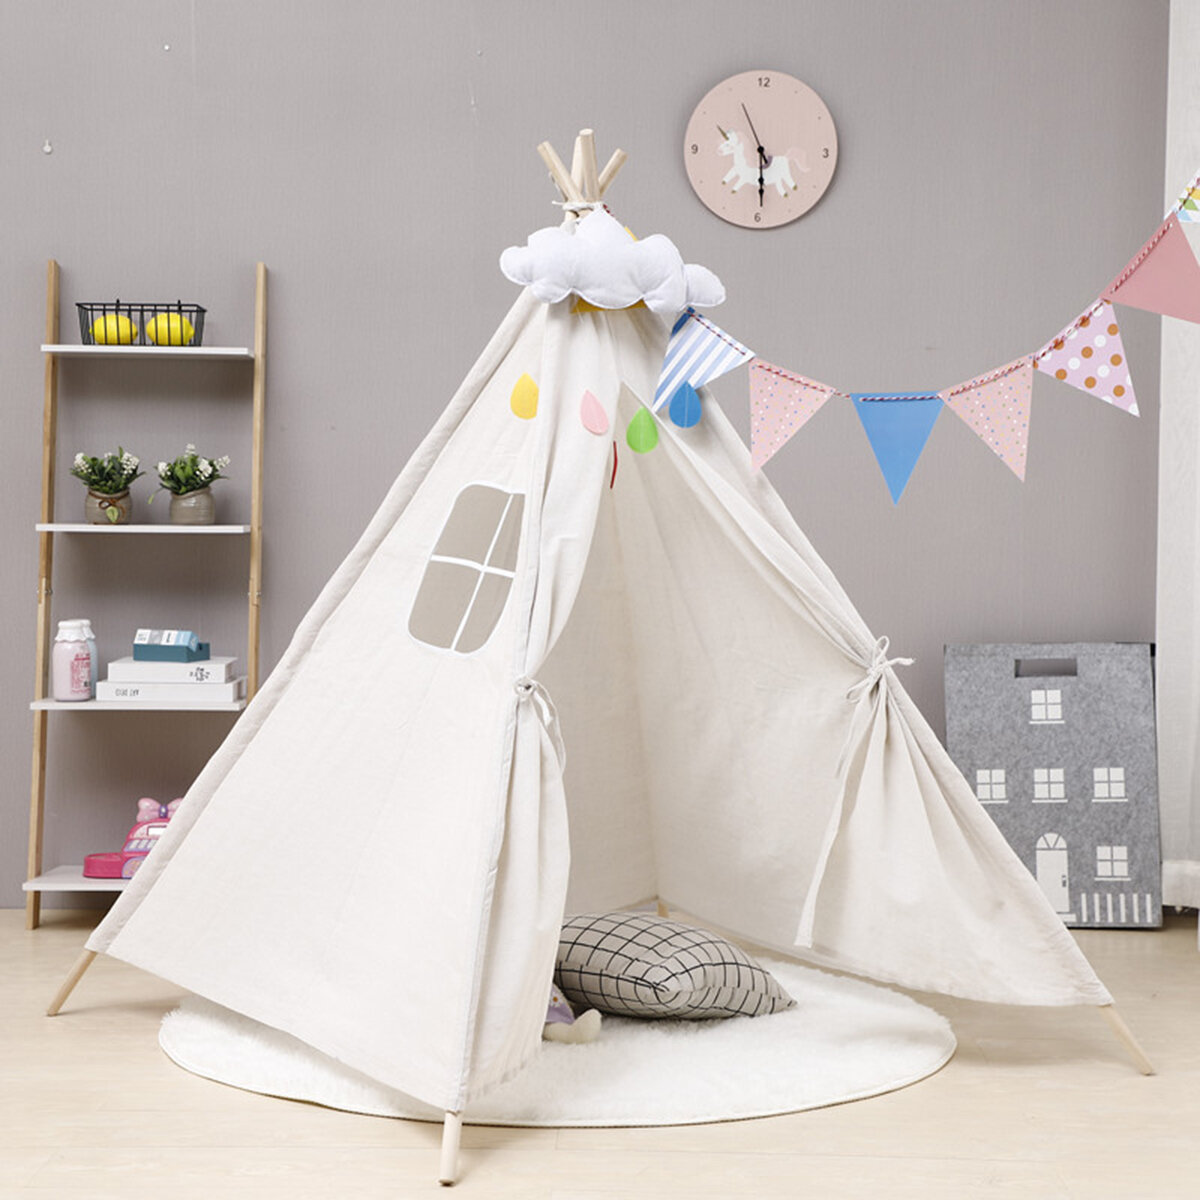 130CM Large Teepee Kids Play Tent Foldable Cotton Canvas Pretend Playhouse Toddler Boy Girls Toy Wigwam Gift Indoor Outd